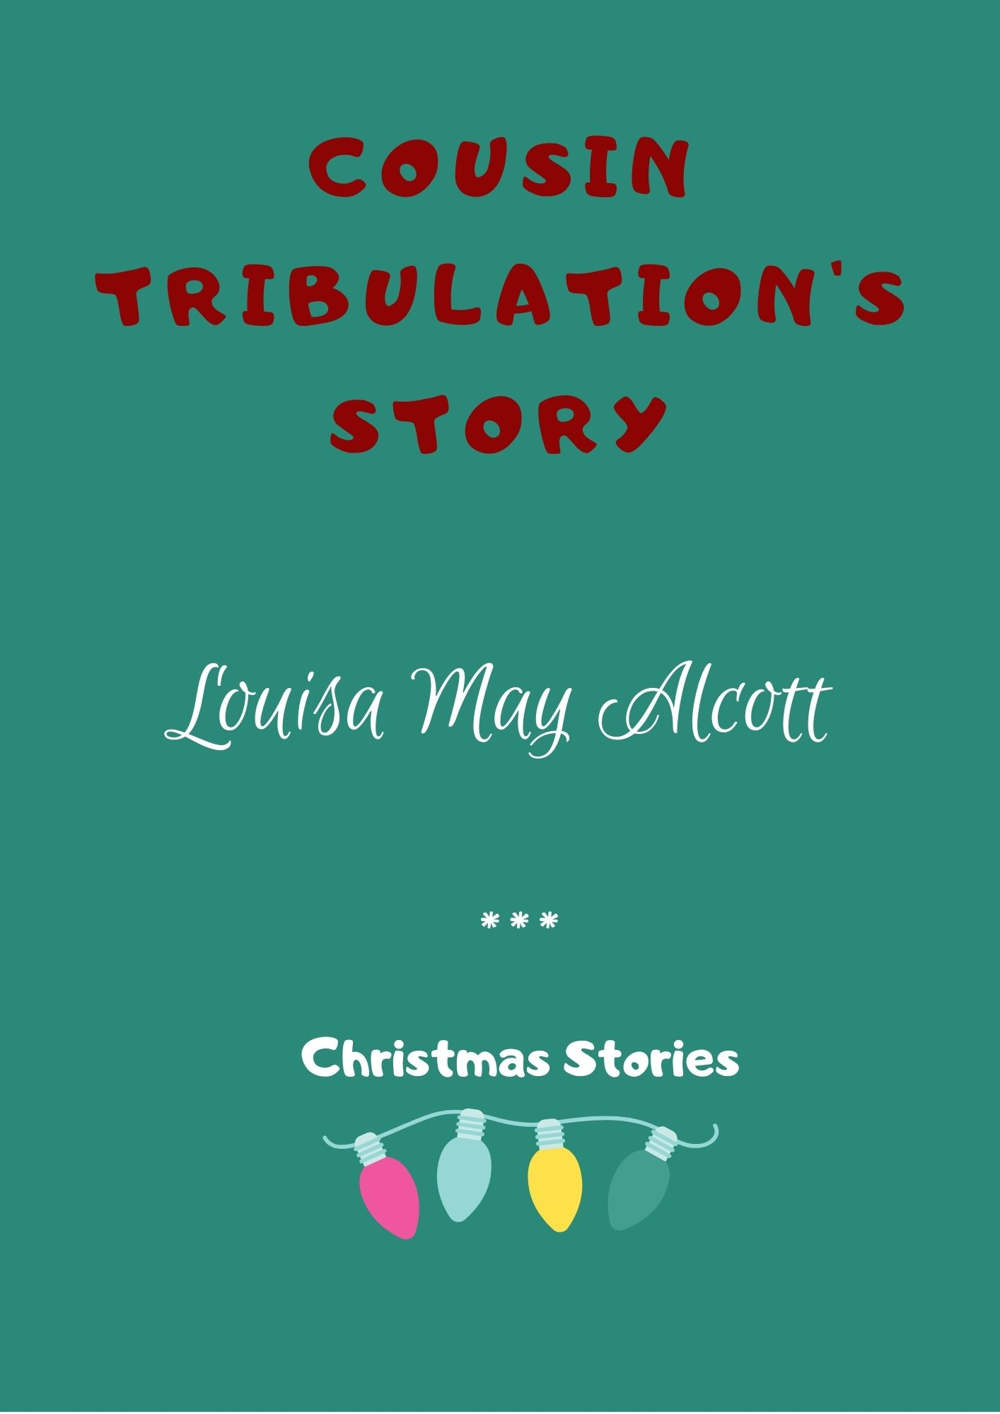 Cousin Tribulation's Story by Louisa May Alcott